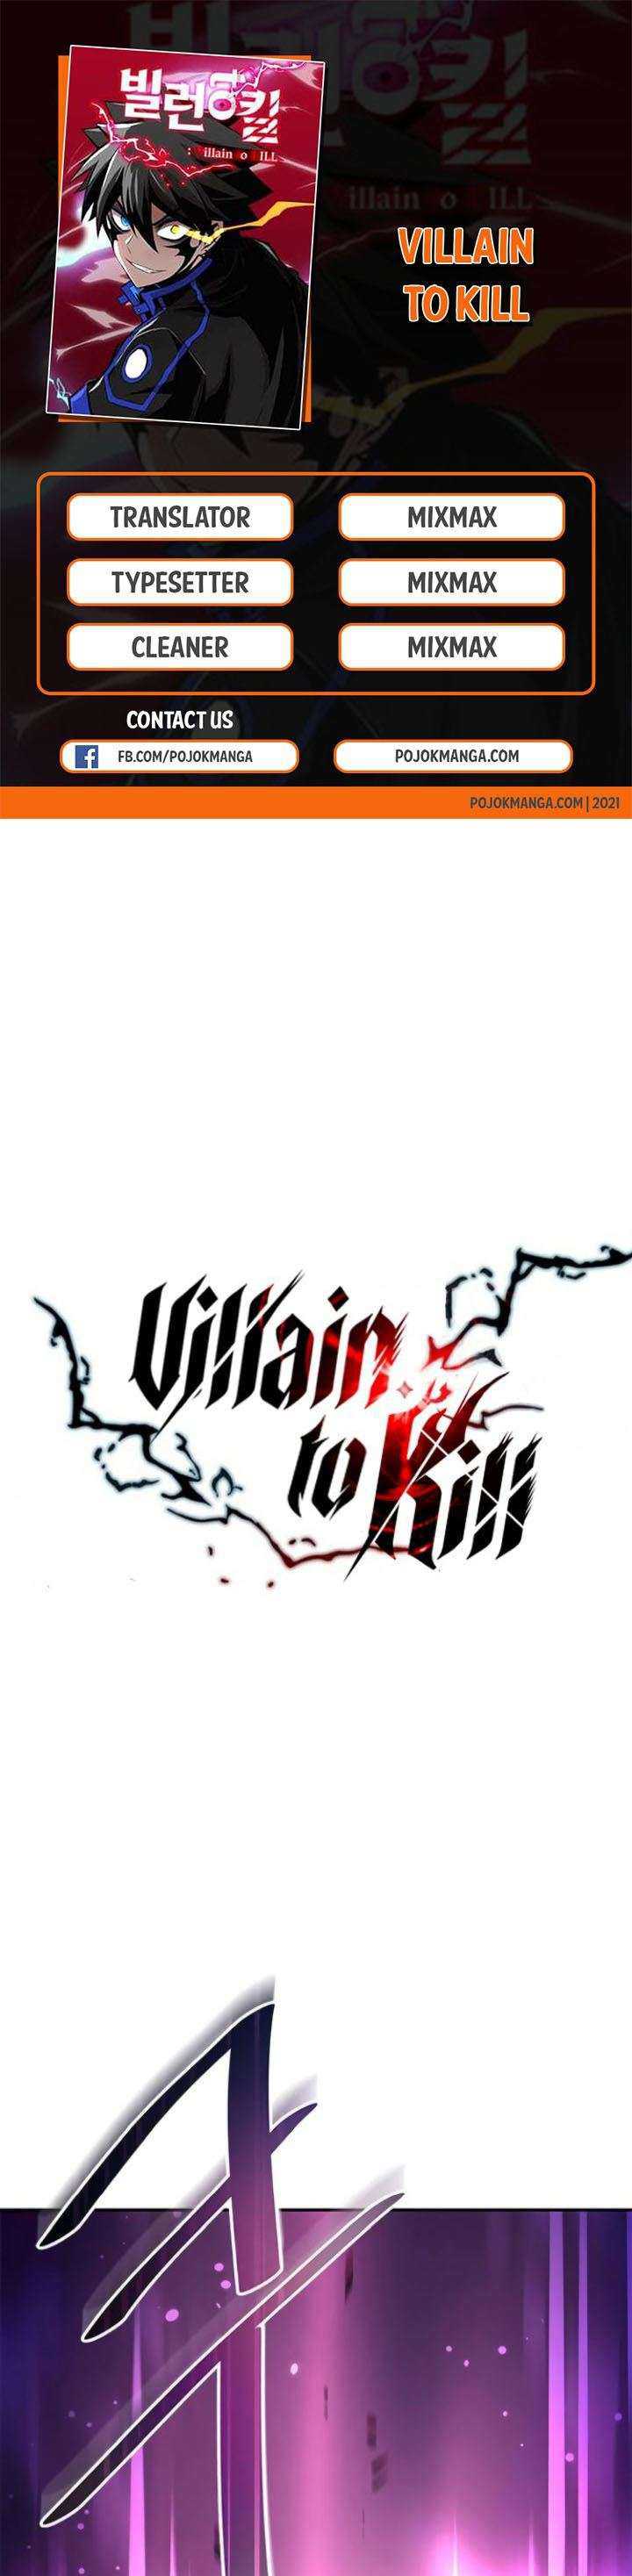 kill-to-villain Chapter chapter-12